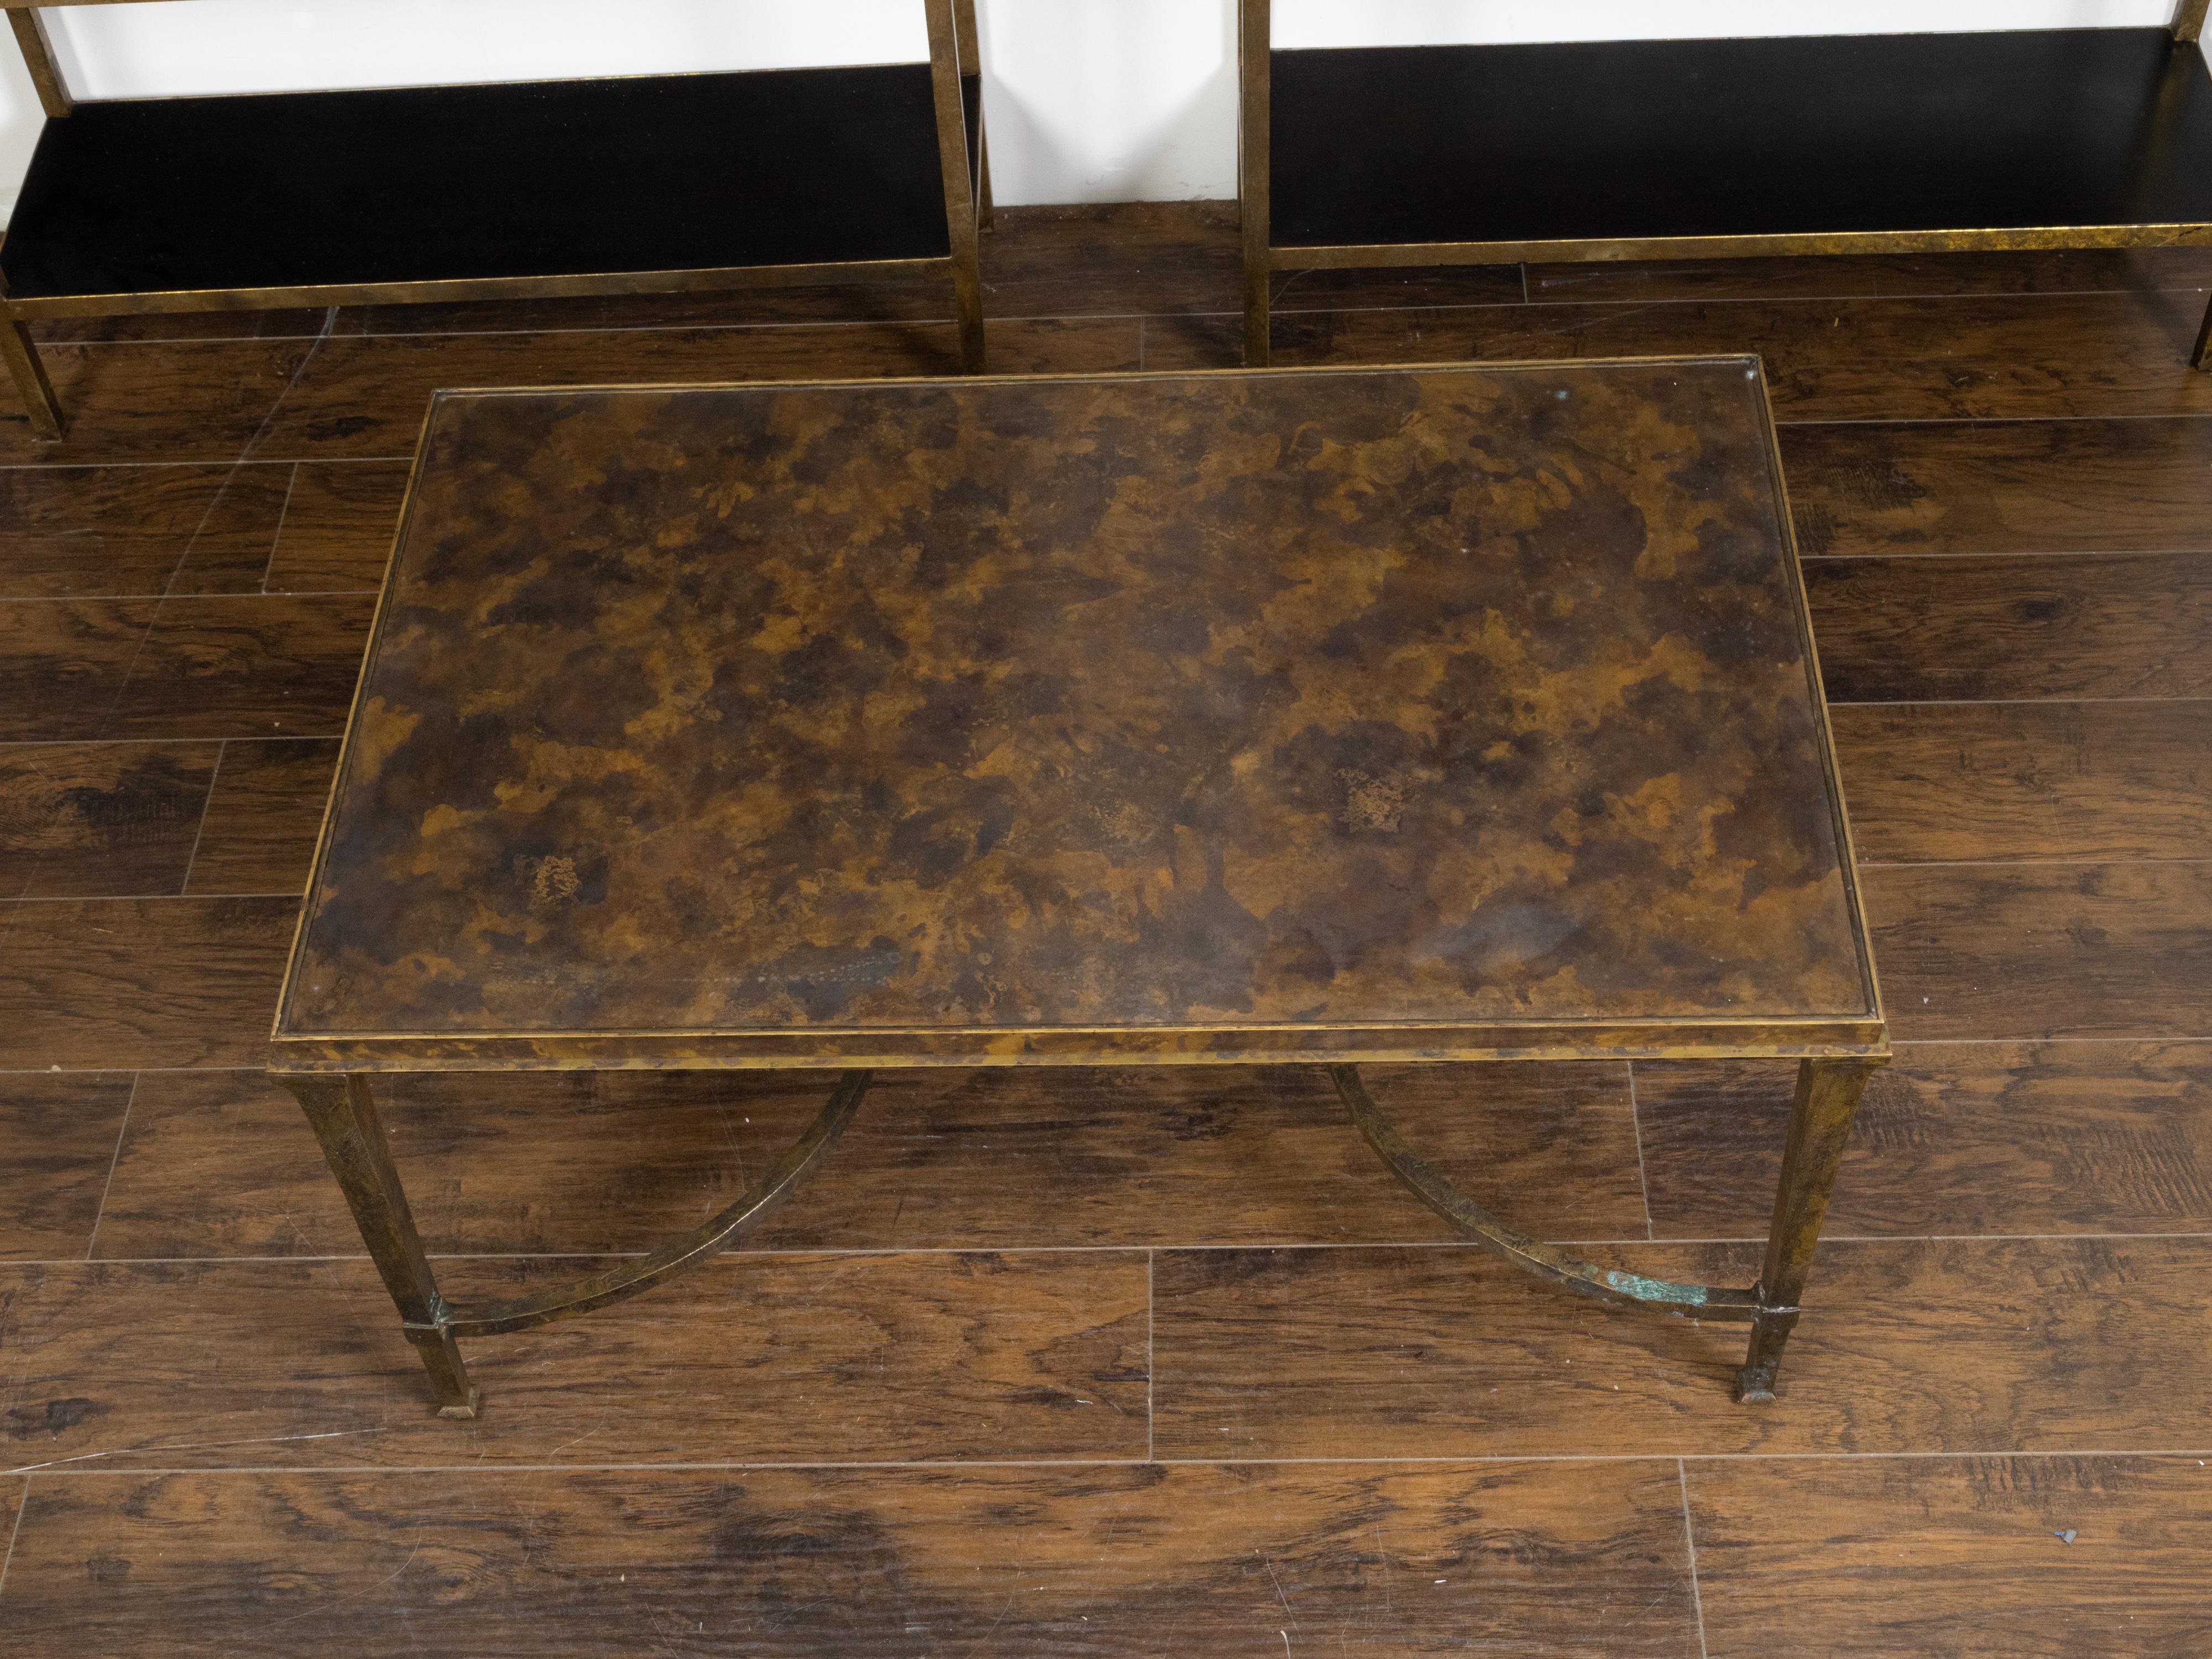 20th Century Midcentury Bronze Coffee Table with Marbleized Top and Half-Moon Stretcher For Sale